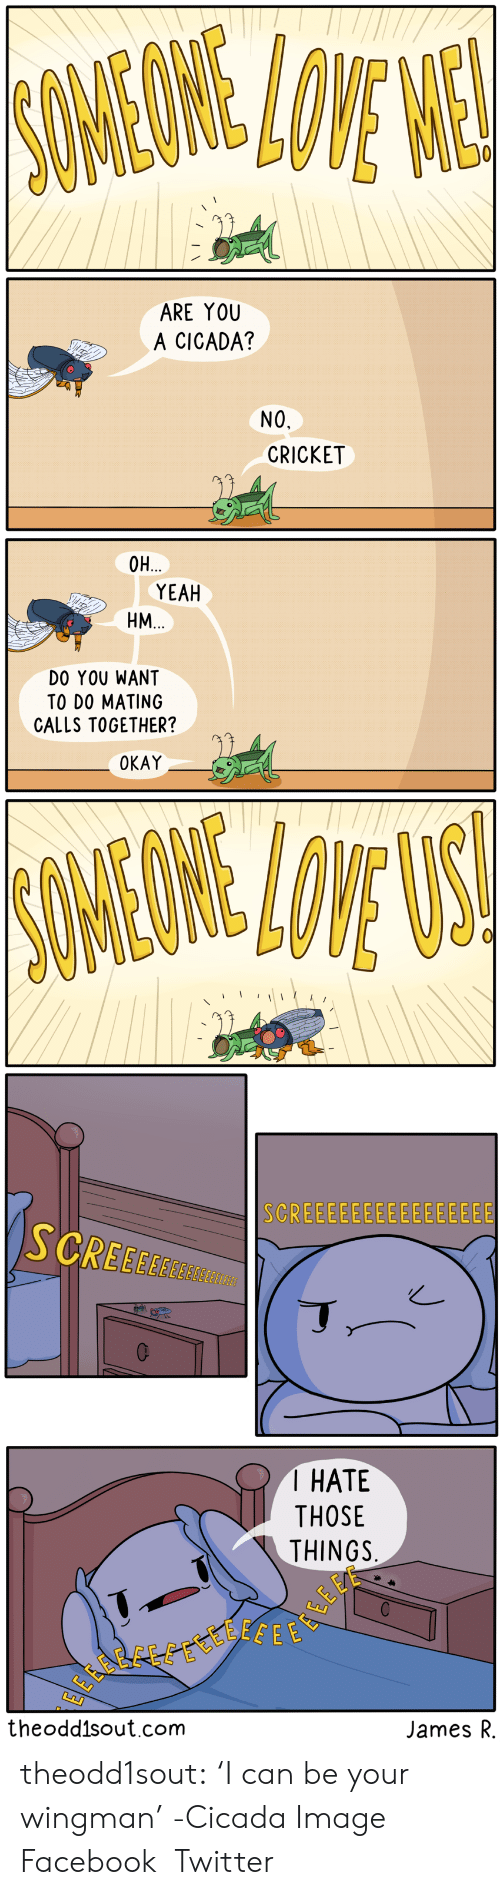 some-we-lowe-e-are-you-a-cicada-no-cricket-64841483.png